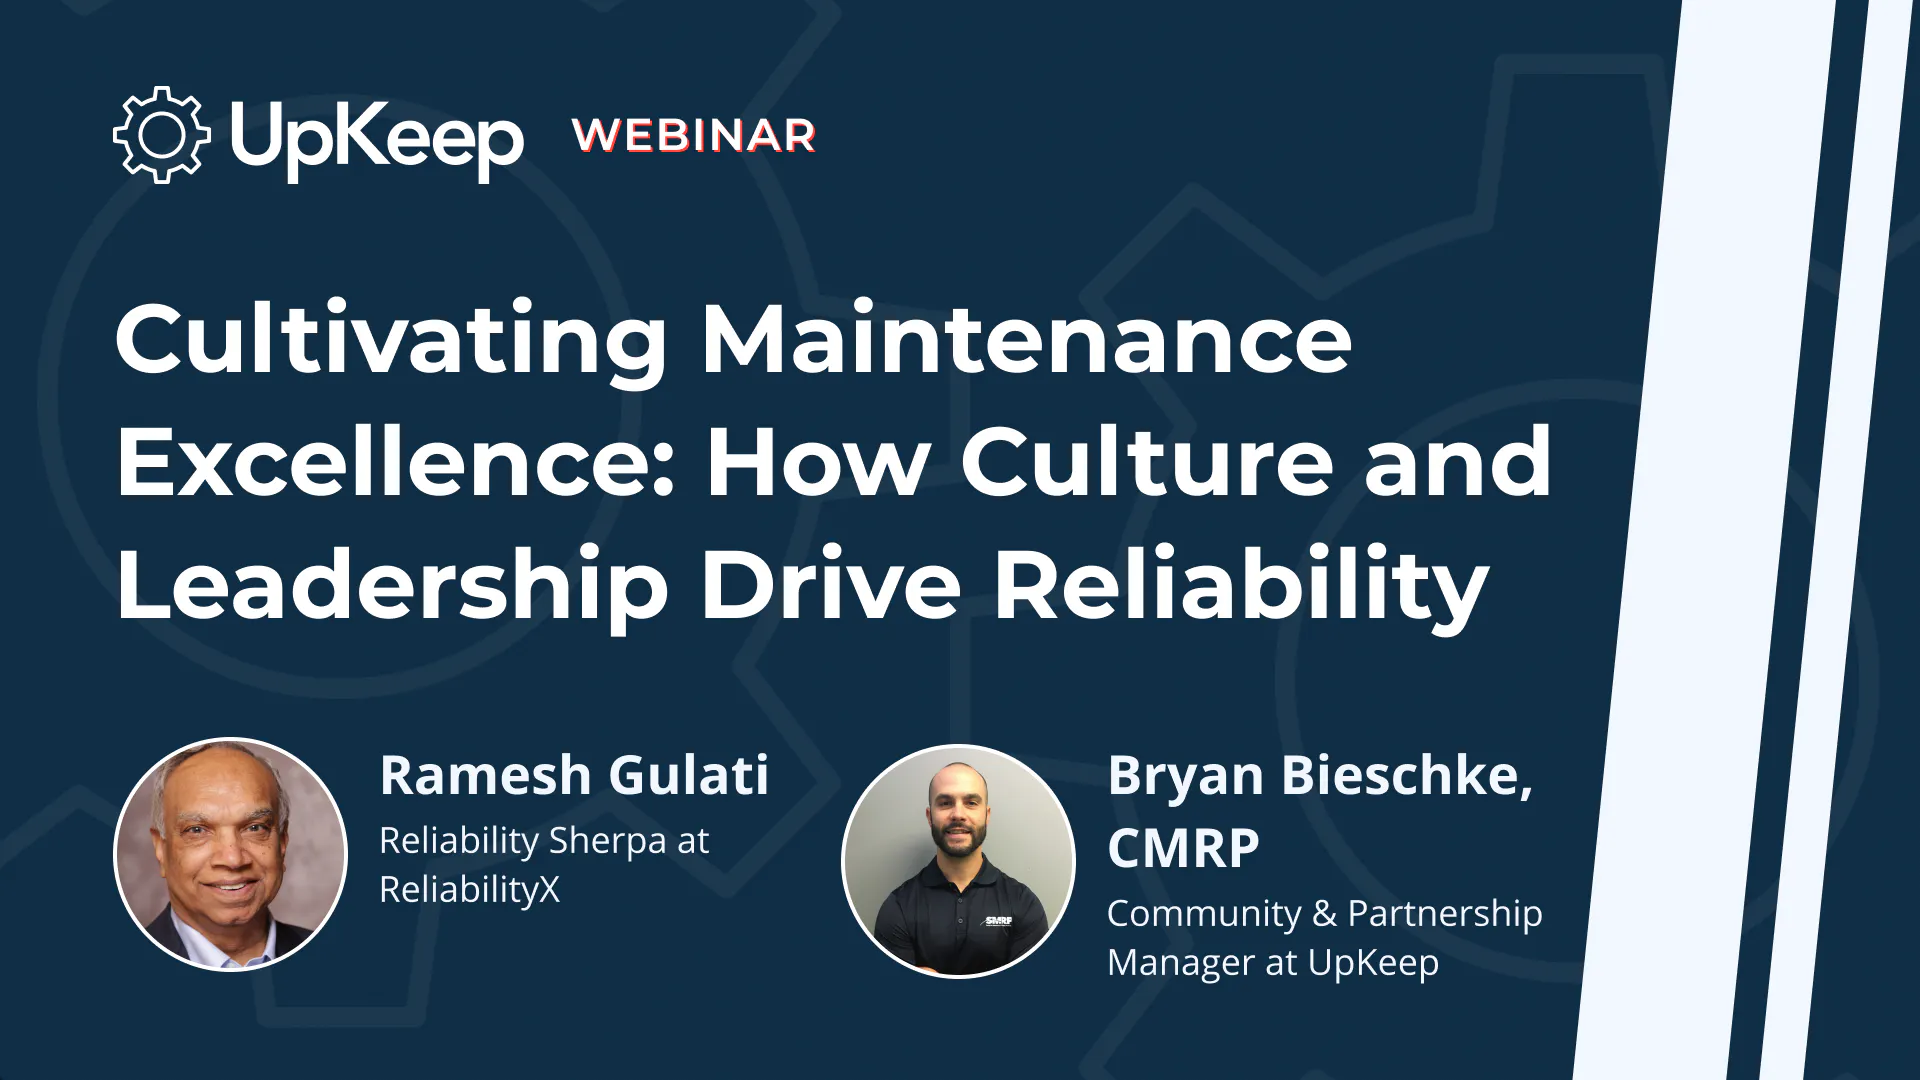 Cultivating Maintenance Excellence: How Culture and Leadership Drive Reliability